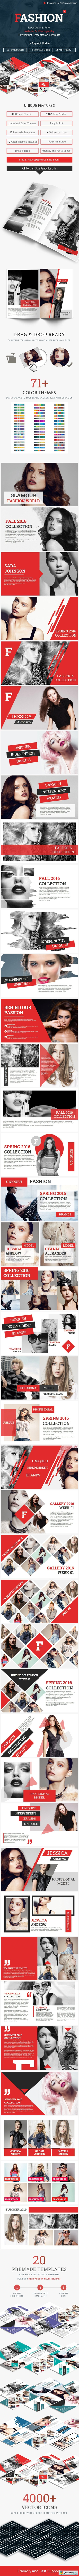 Fashion and Photography PowerPoint Presentation Template